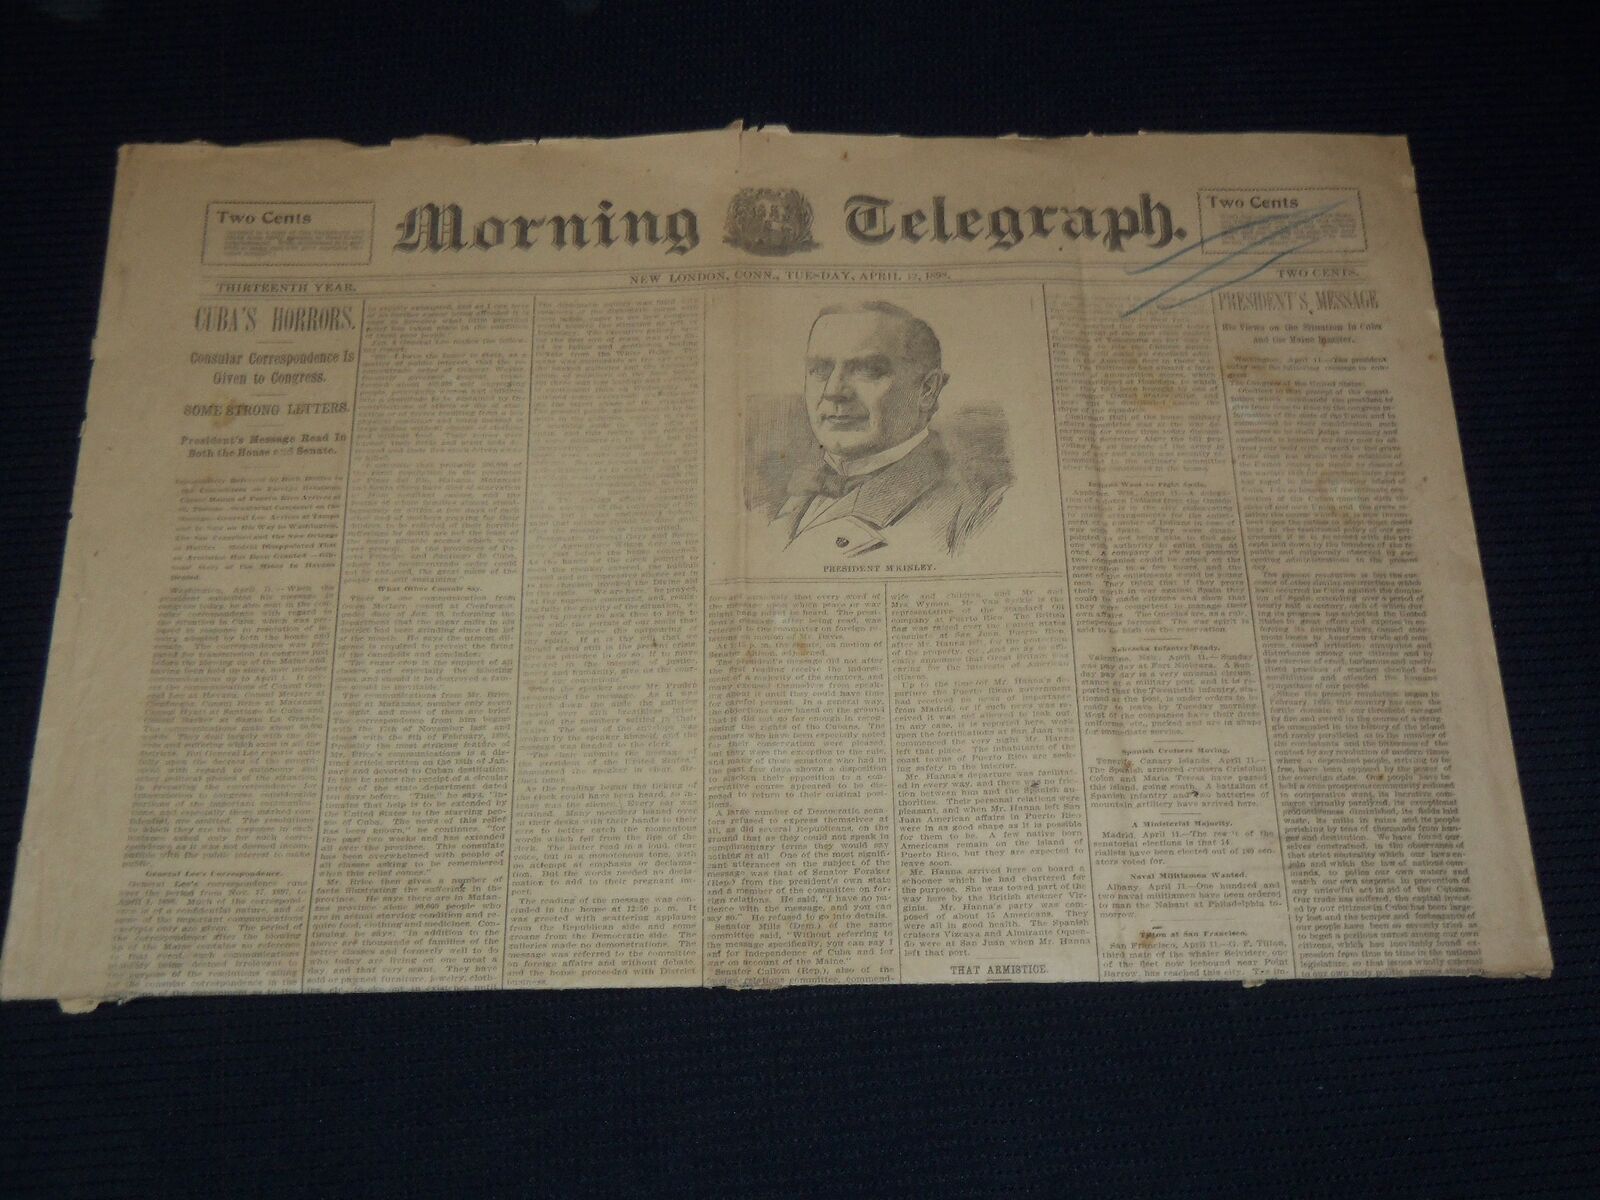 1898 APRIL 12 MORNING TELEGRAPH NEWSPAPER - MCKINLEY'S VIEWS ON MAINE - NP 2152A